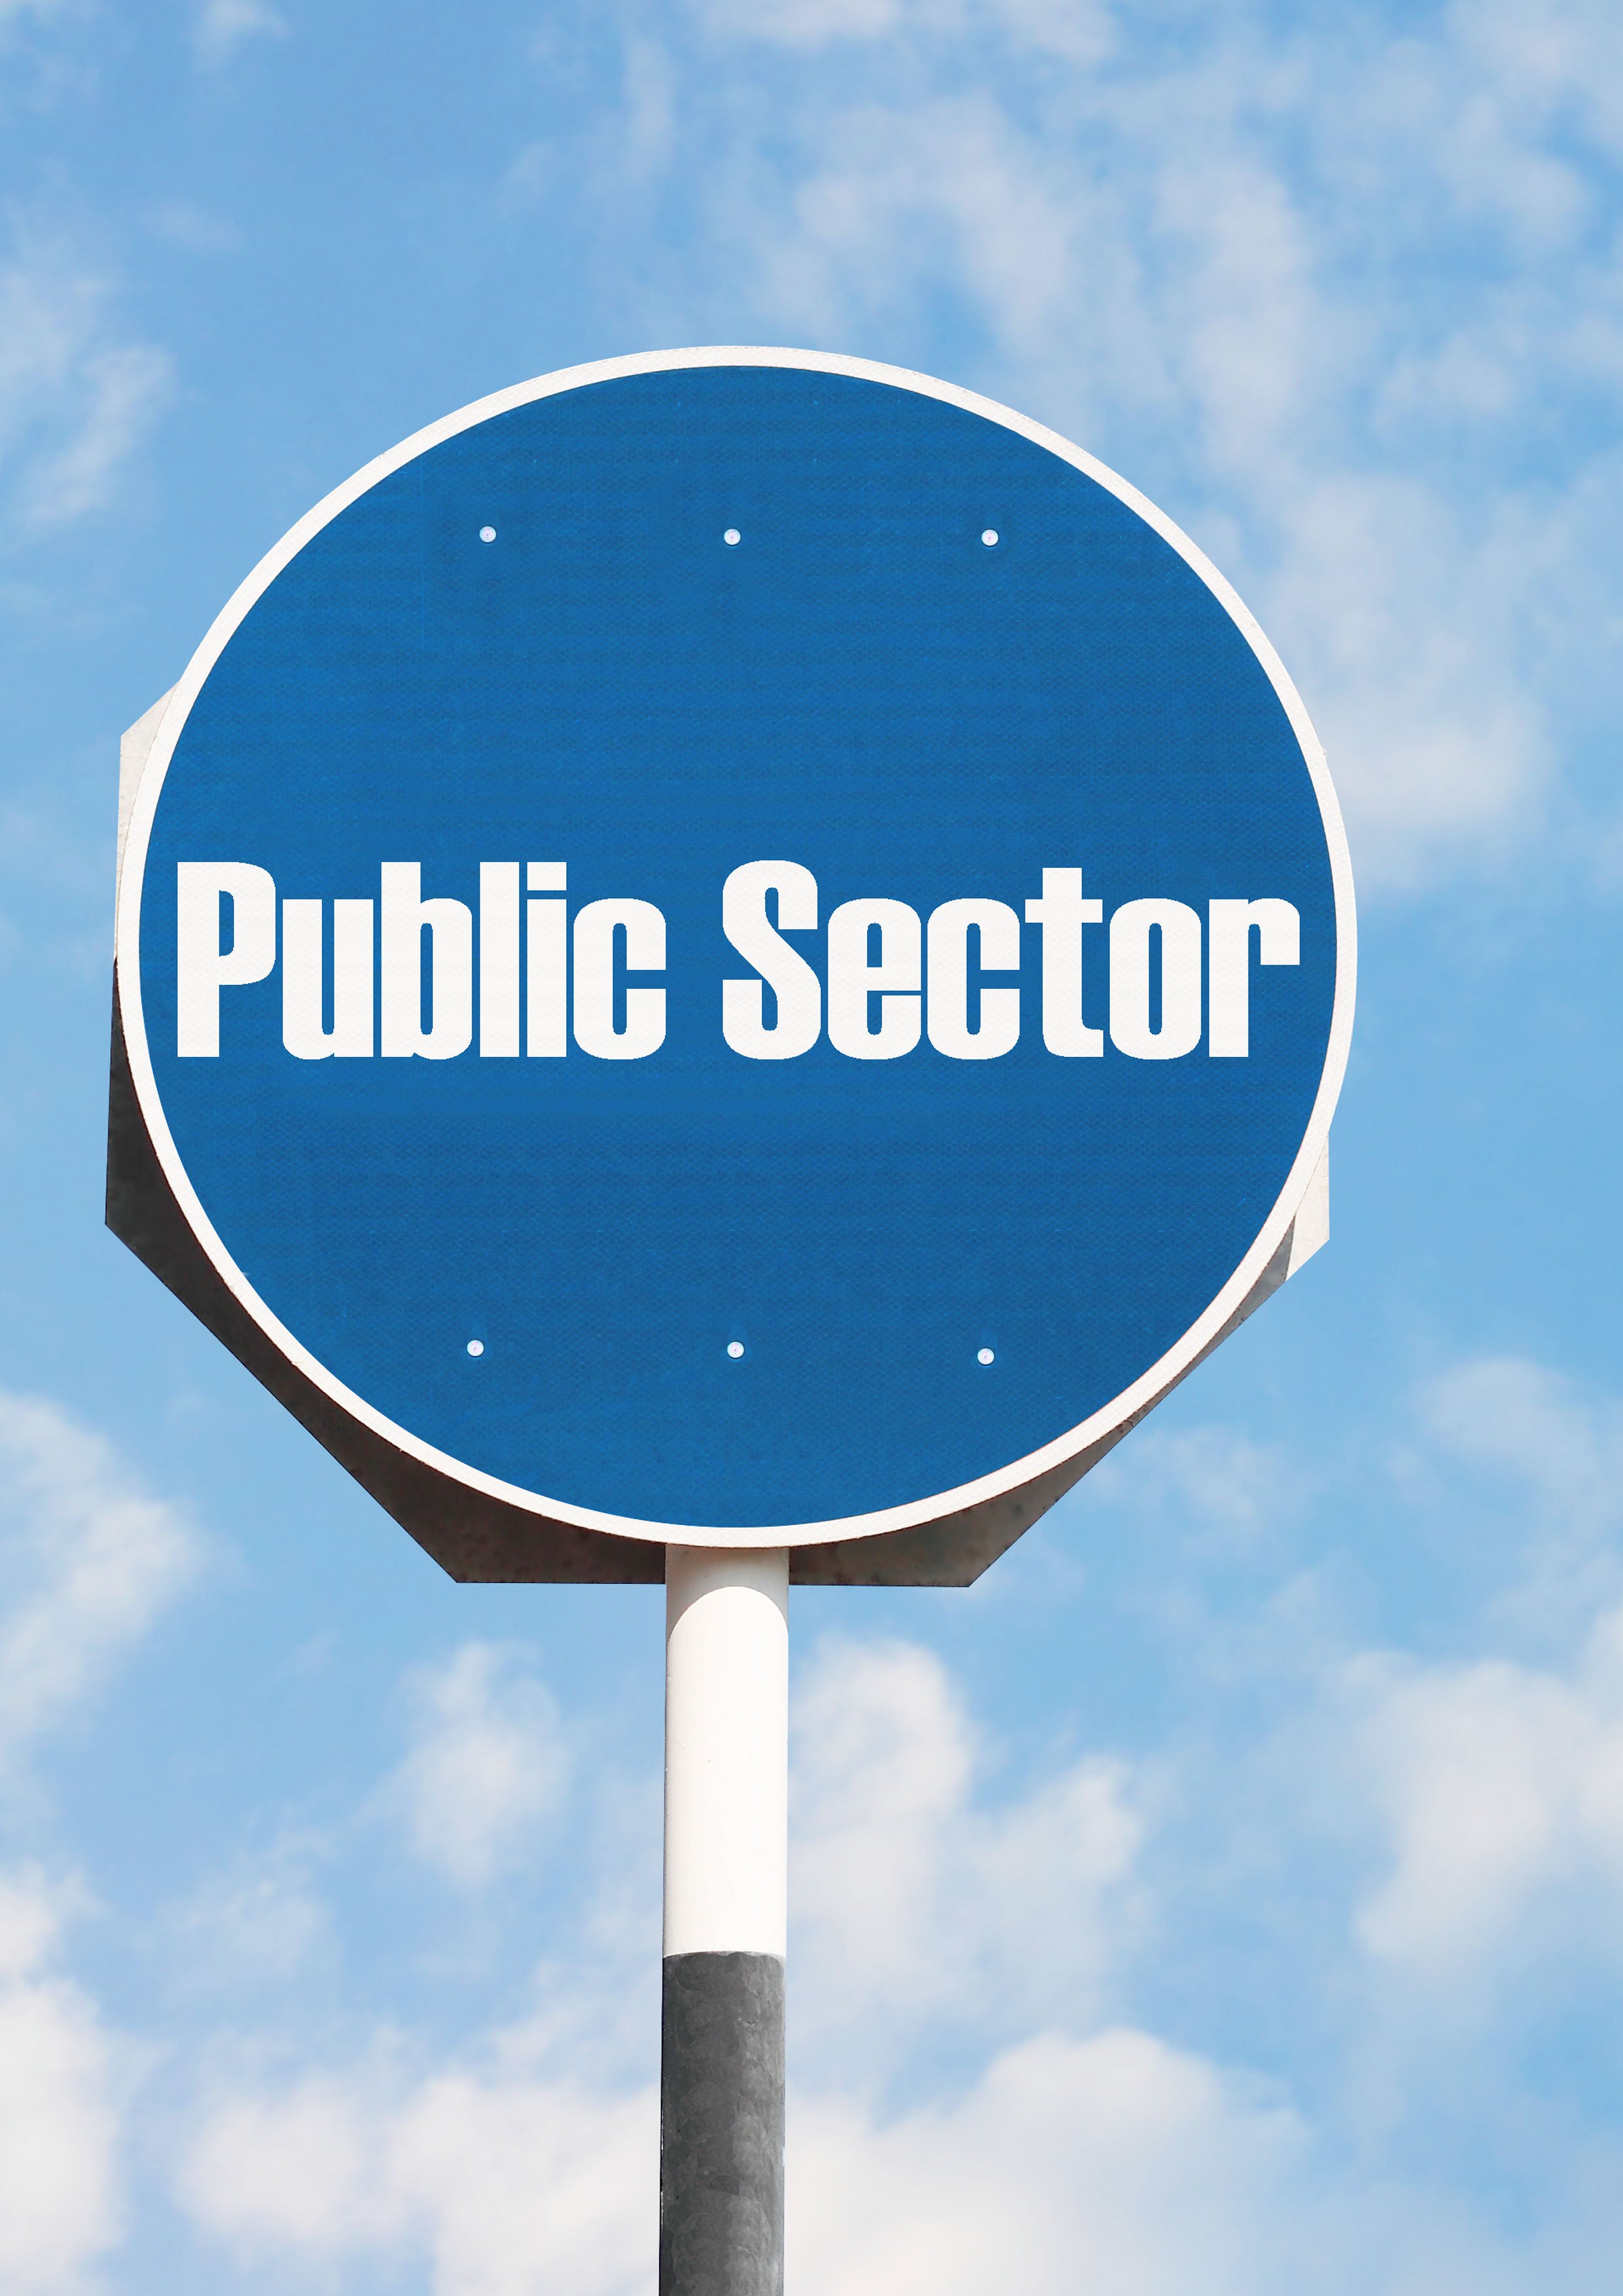 Strategy Management in the Public Sector Training Courses - Dubai | Meirc